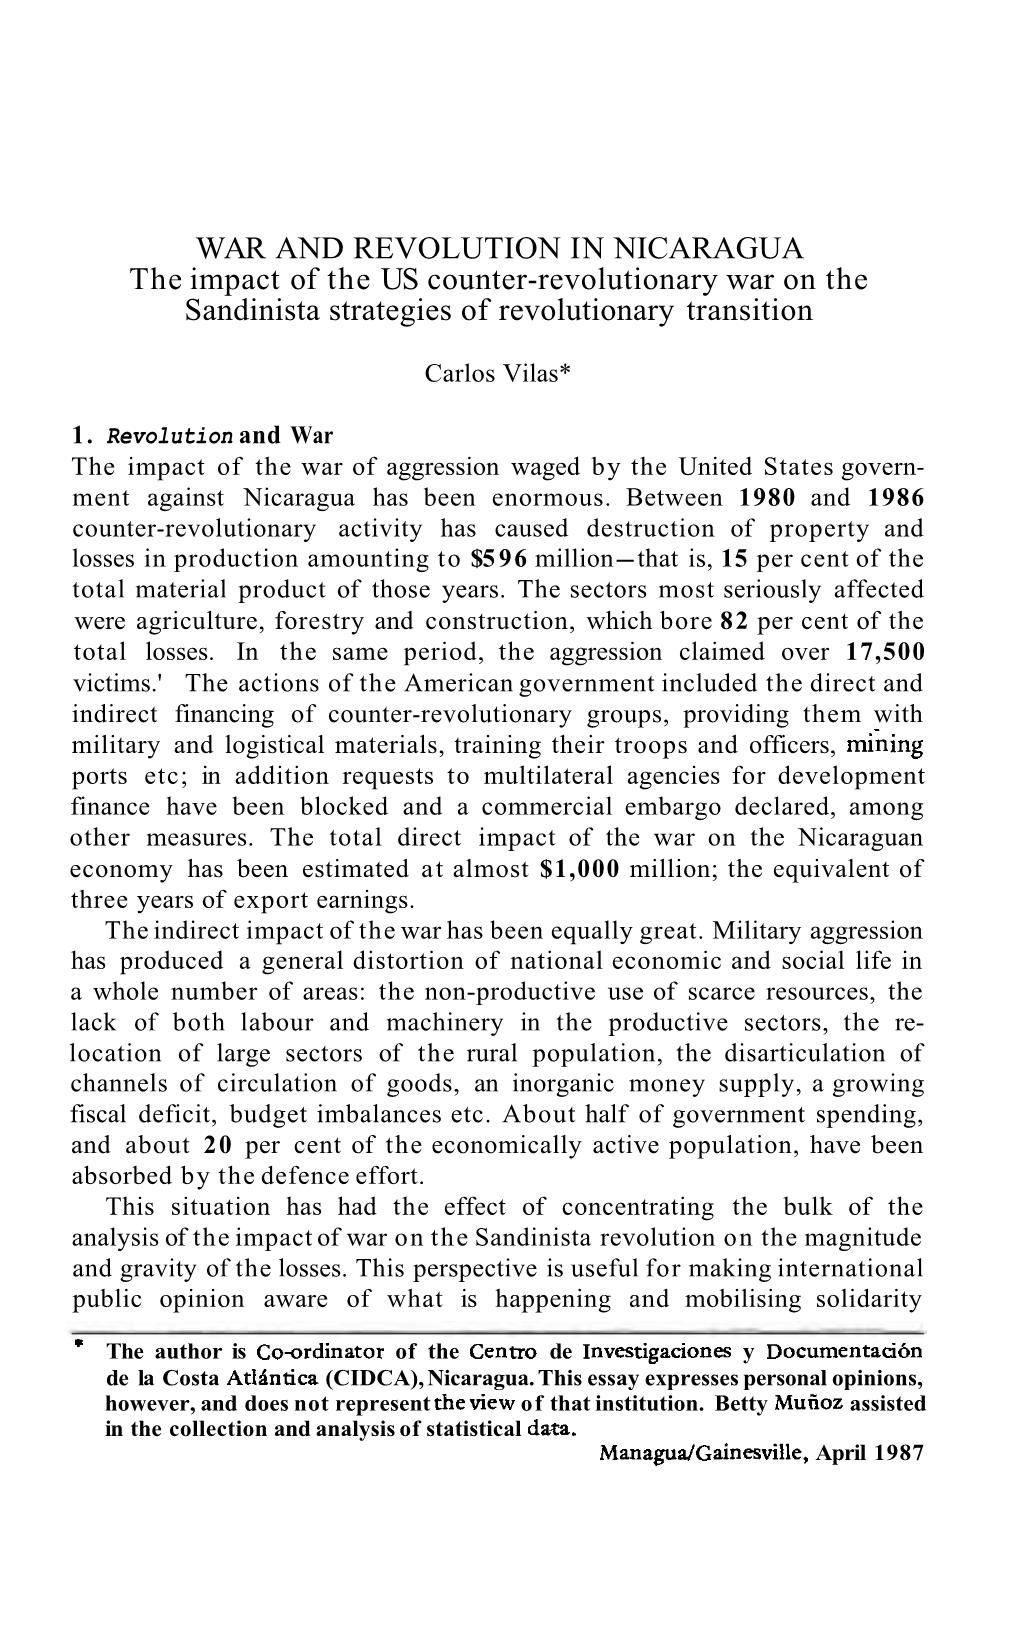 WAR and REVOLUTION in NICARAGUA the Impact of the US Counter-Revolutionary War on the Sandinista Strategies of Revolutionary Transition